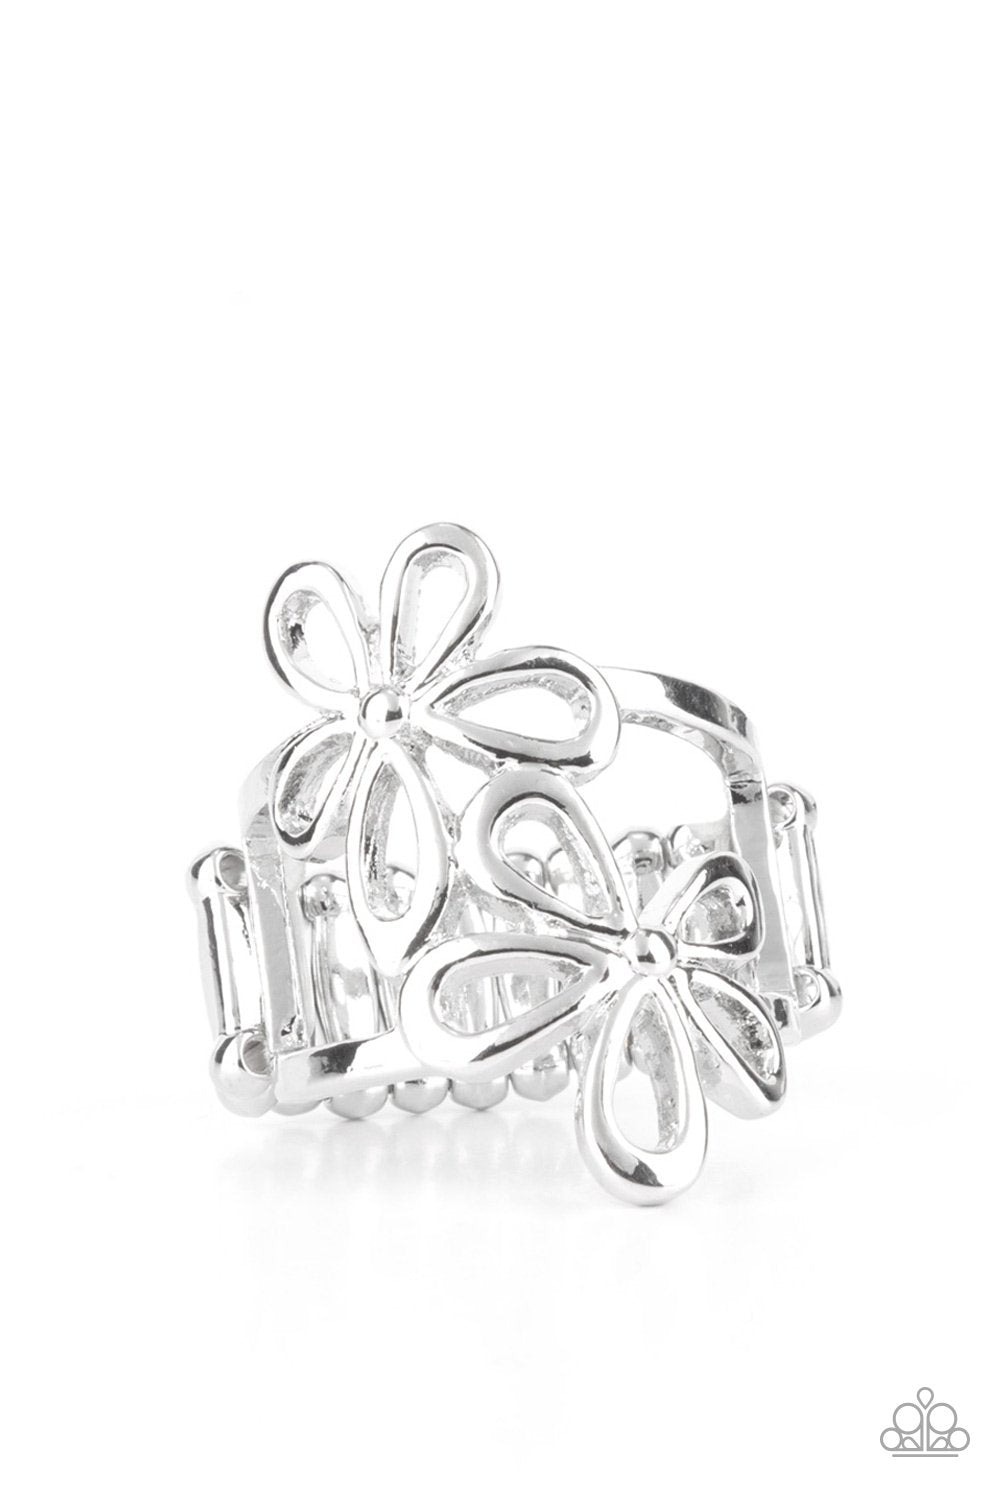 Perennial Pair Silver Daisy Flower Ring - Paparazzi Accessories- lightbox - CarasShop.com - $5 Jewelry by Cara Jewels